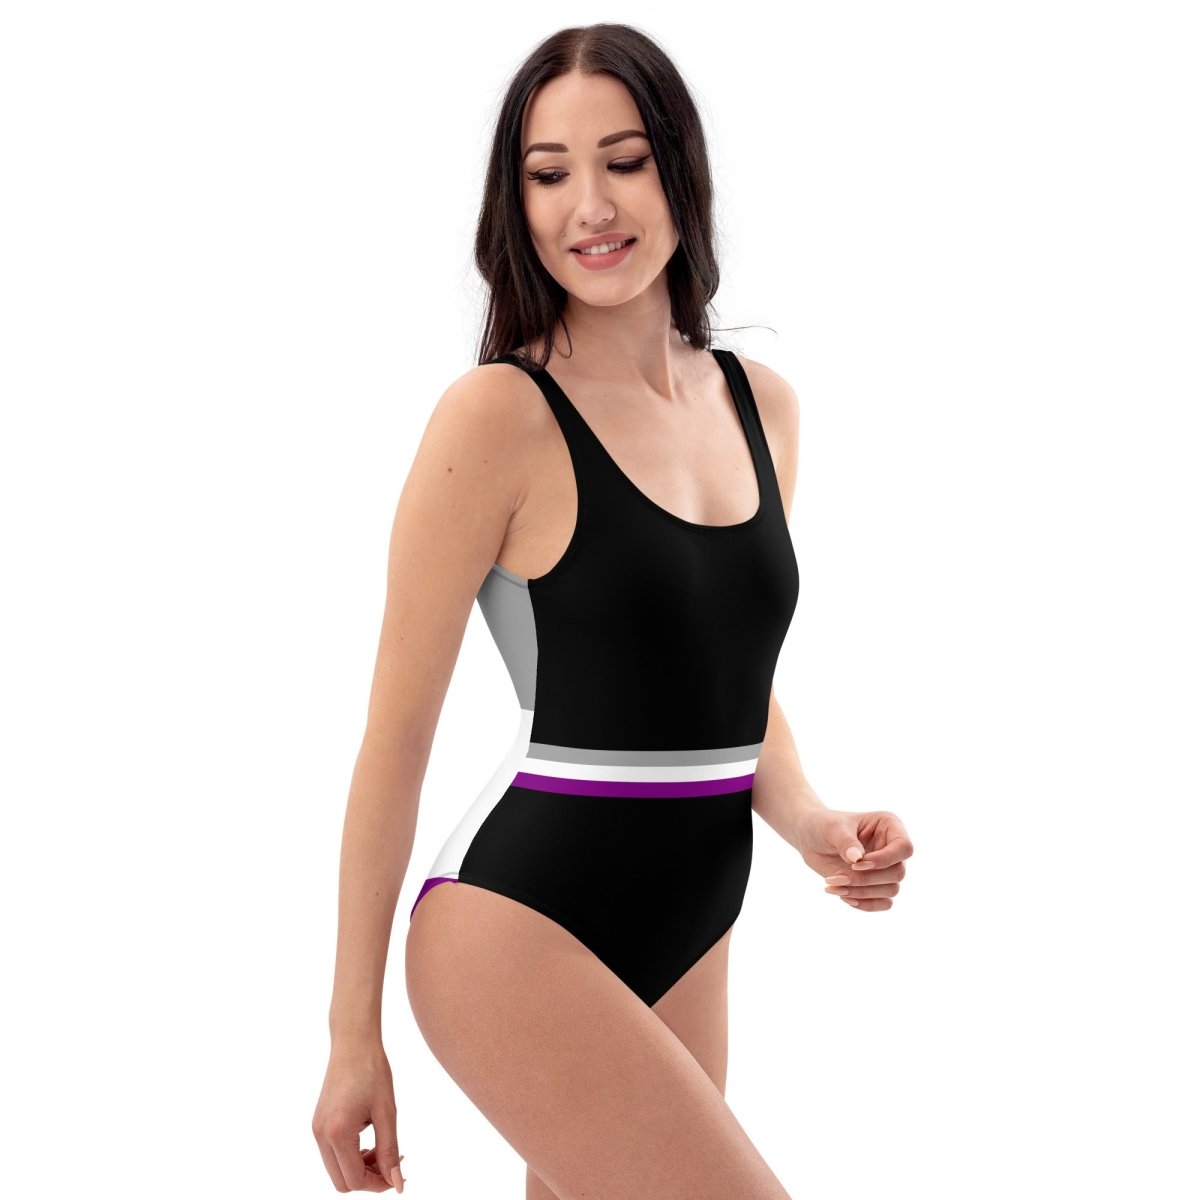 Asexual Stripe One-Piece Swimsuit - On Trend Shirts